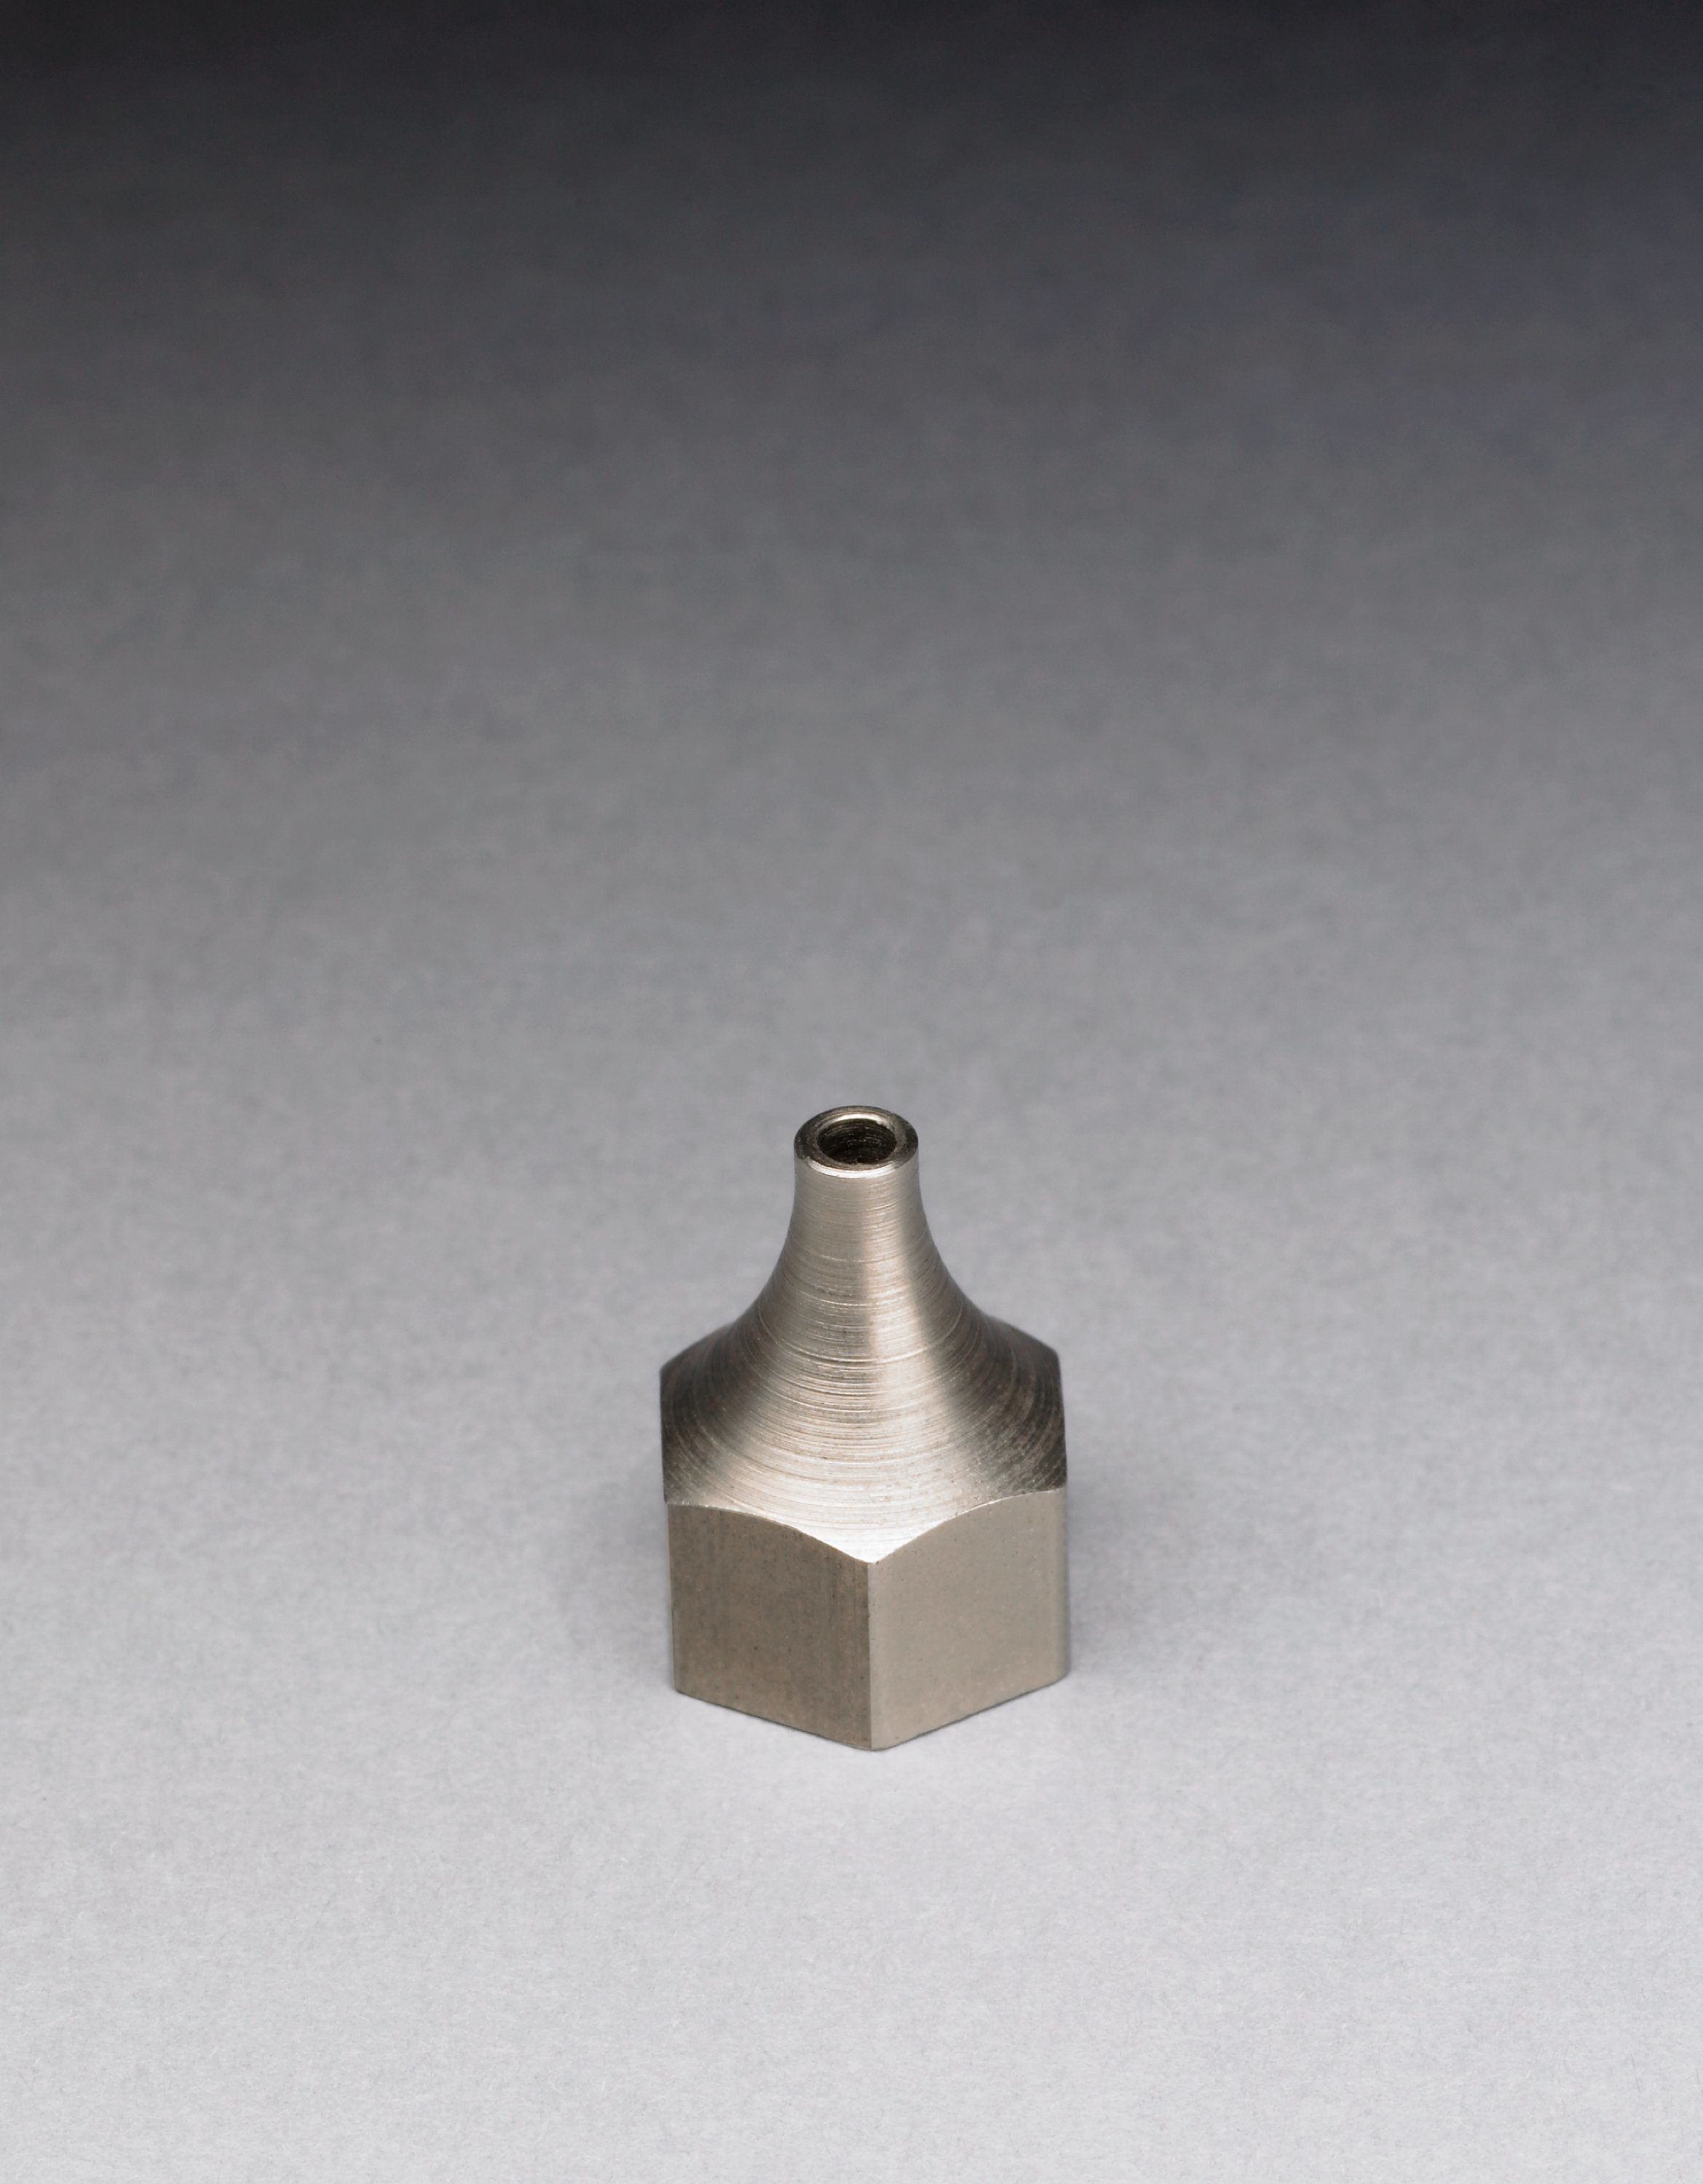 A fluted metal tip designed as a replacement for standard nozzles (0.090") on most 3M™ Hot Melt Applicators.